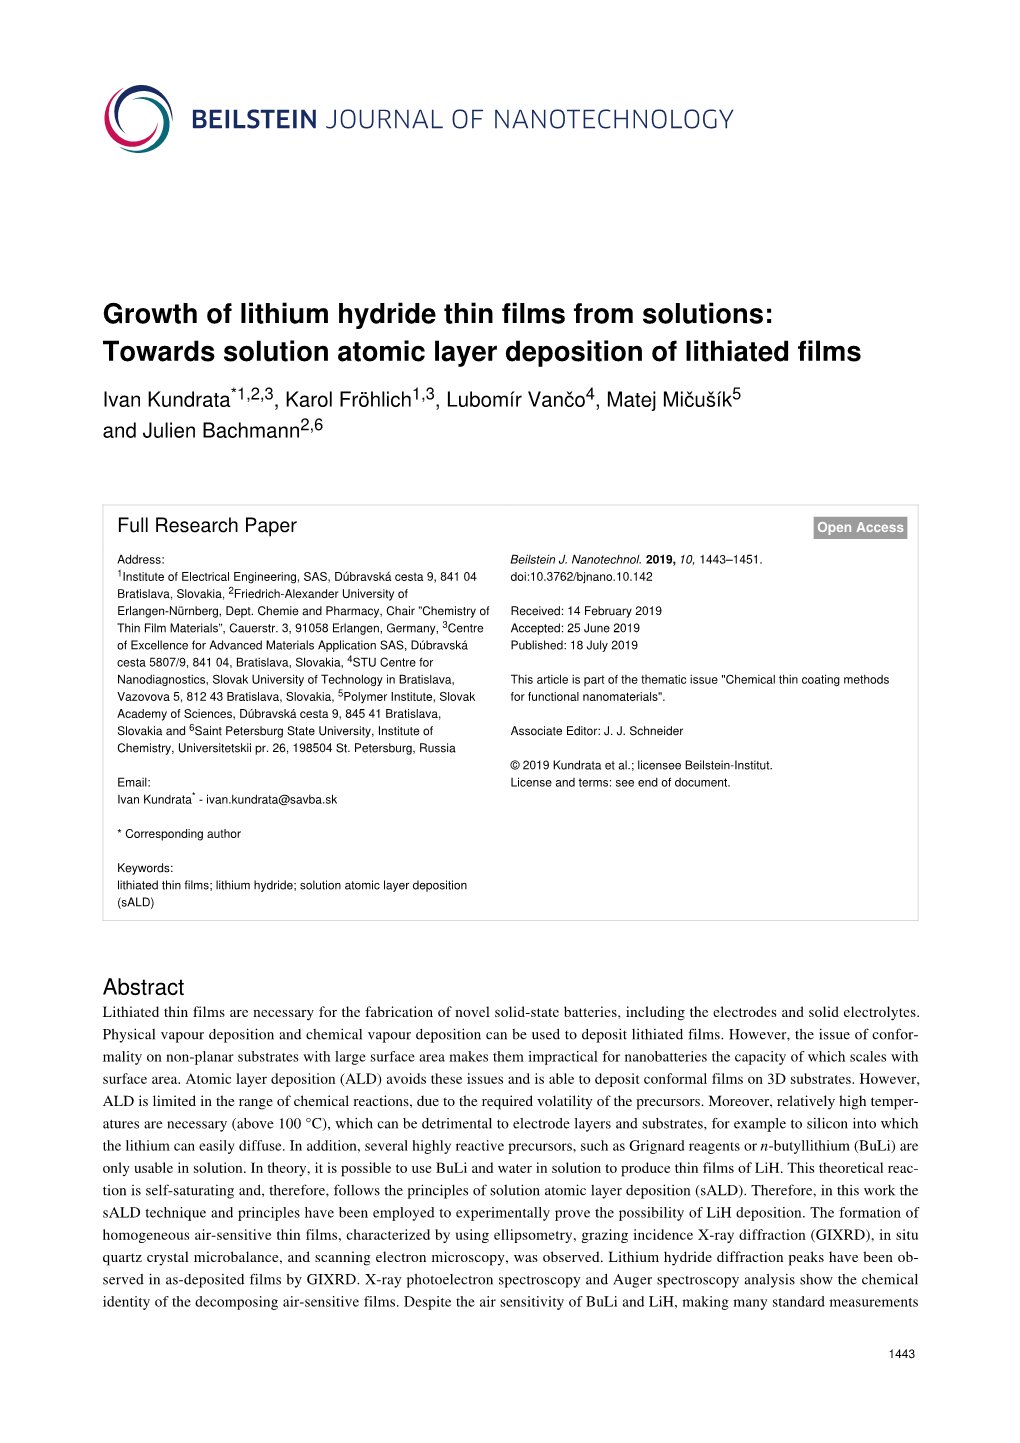 Growth of Lithium Hydride Thin Films from Solutions: Towards Solution Atomic Layer Deposition of Lithiated Films